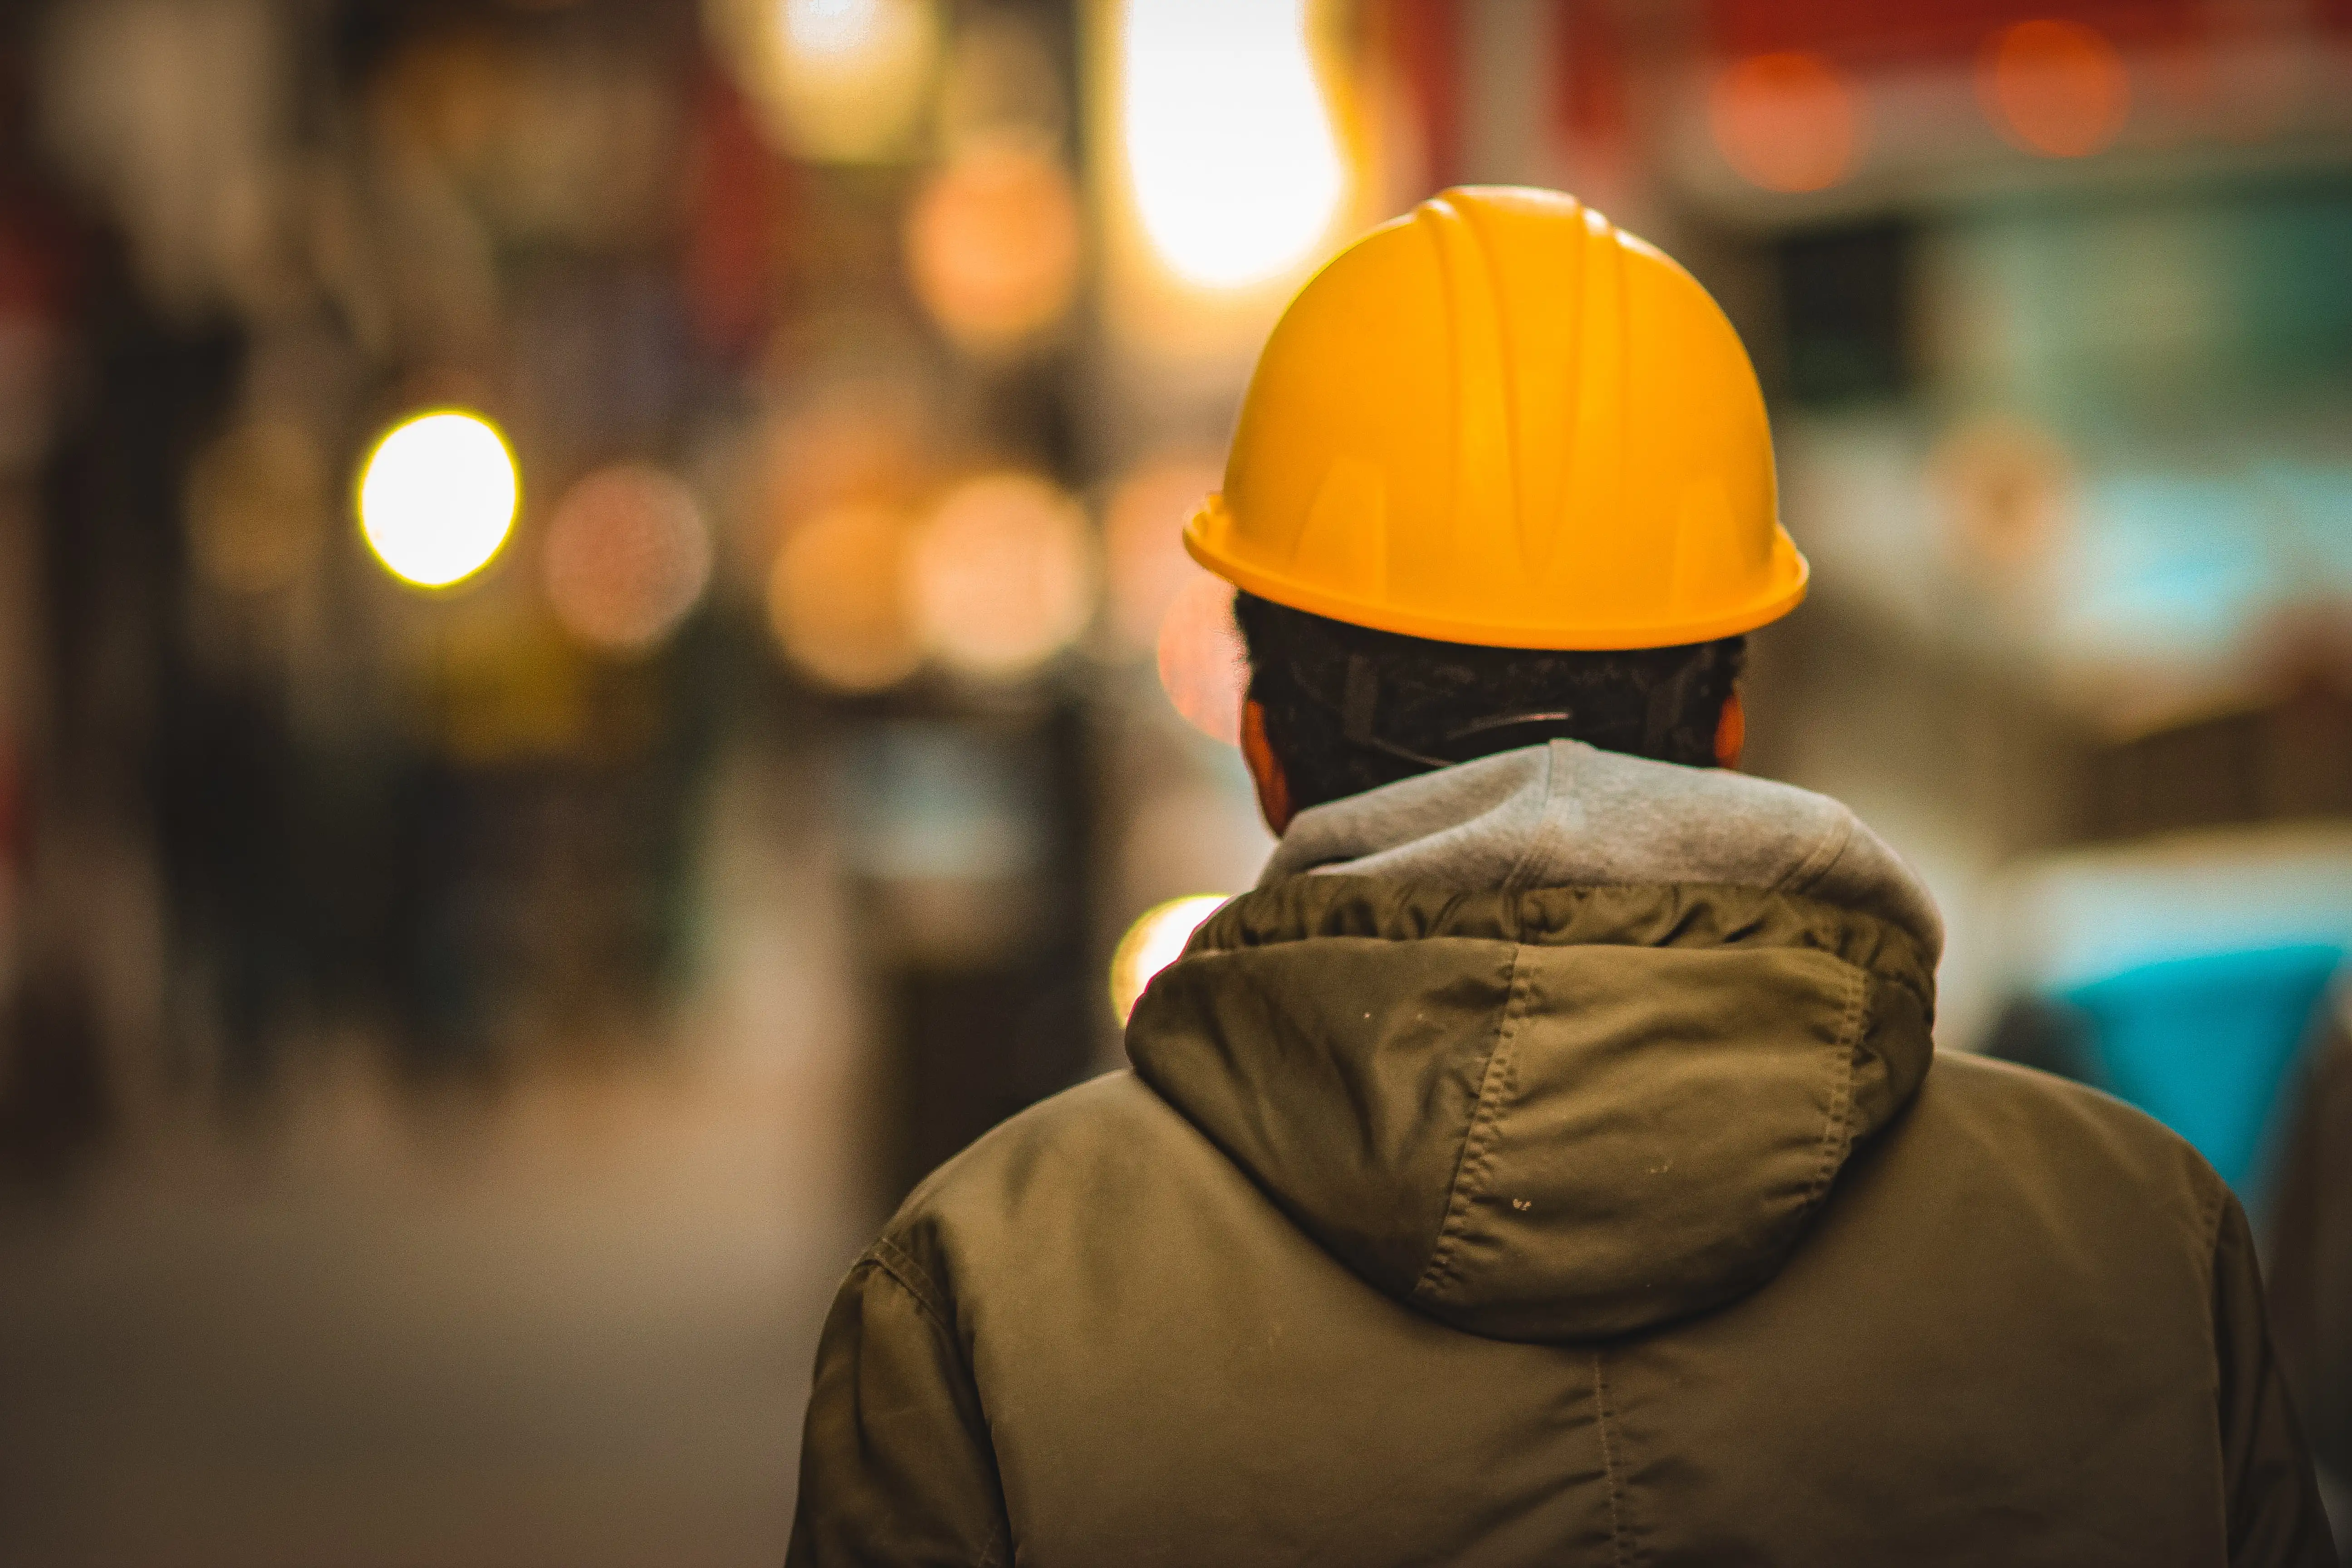 The backside of a worker with a yellow construction helmet and blurry background